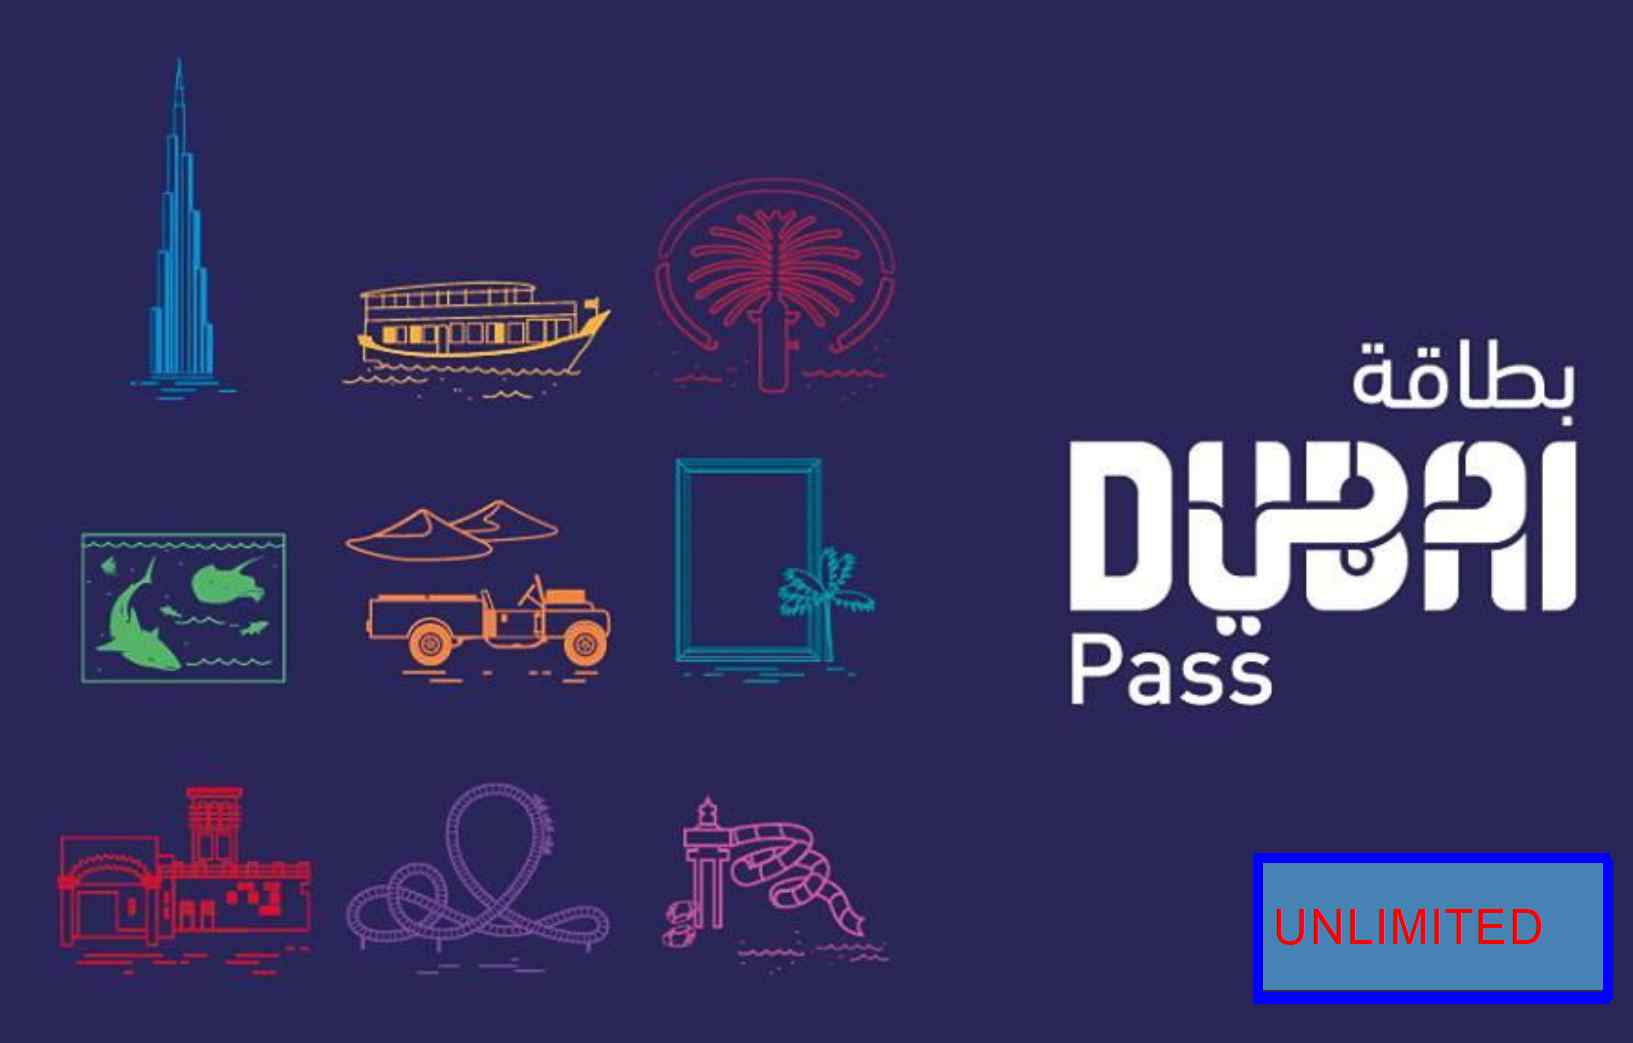 If you are planning a trip to Dubai and looking for a city pass to make the most of your visit, various options are available.